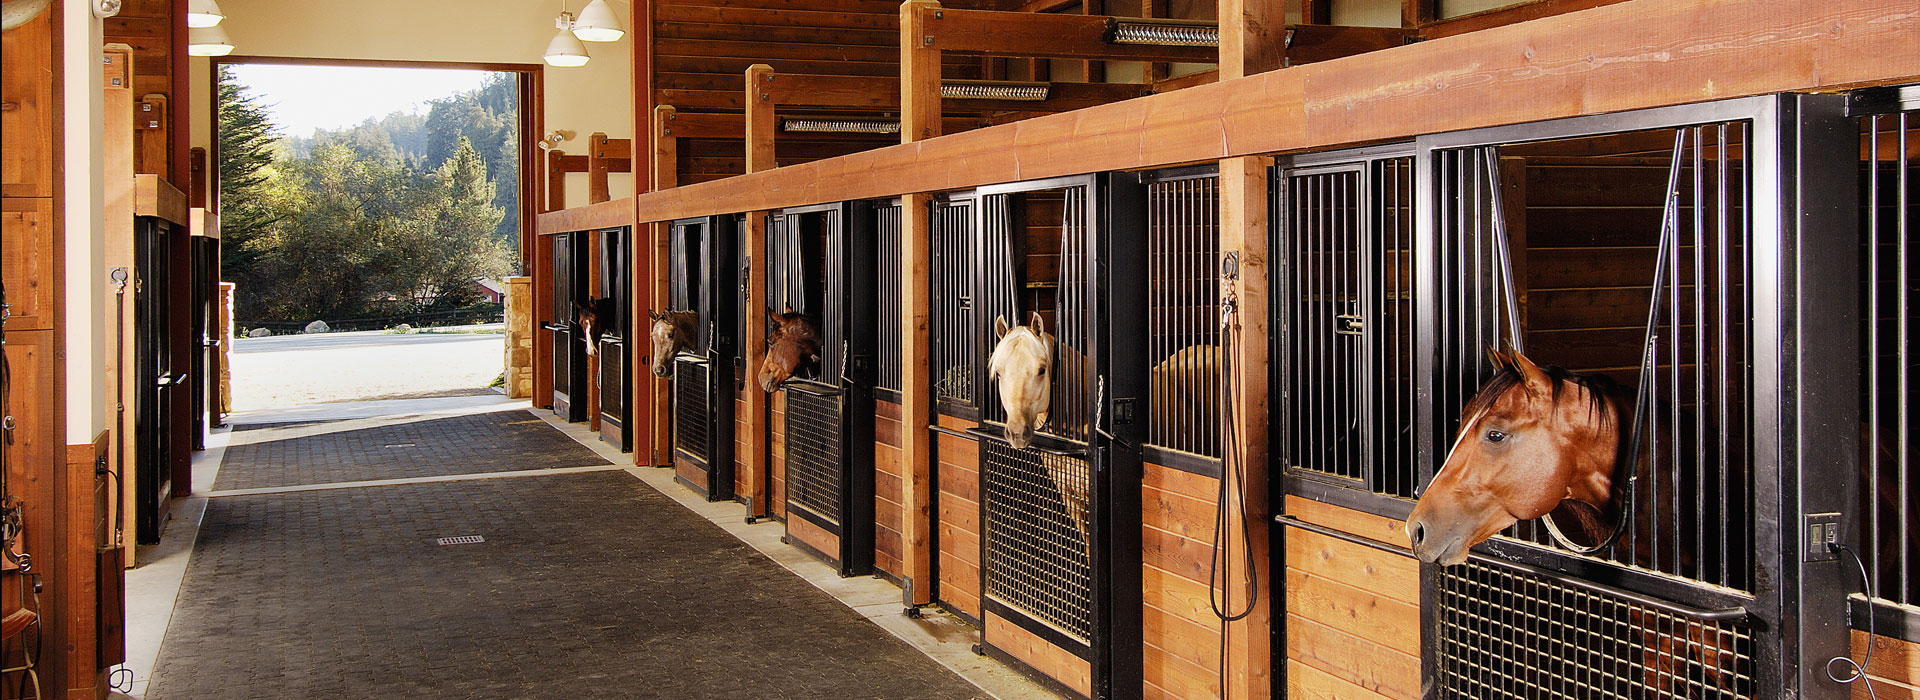 Horses in Stables